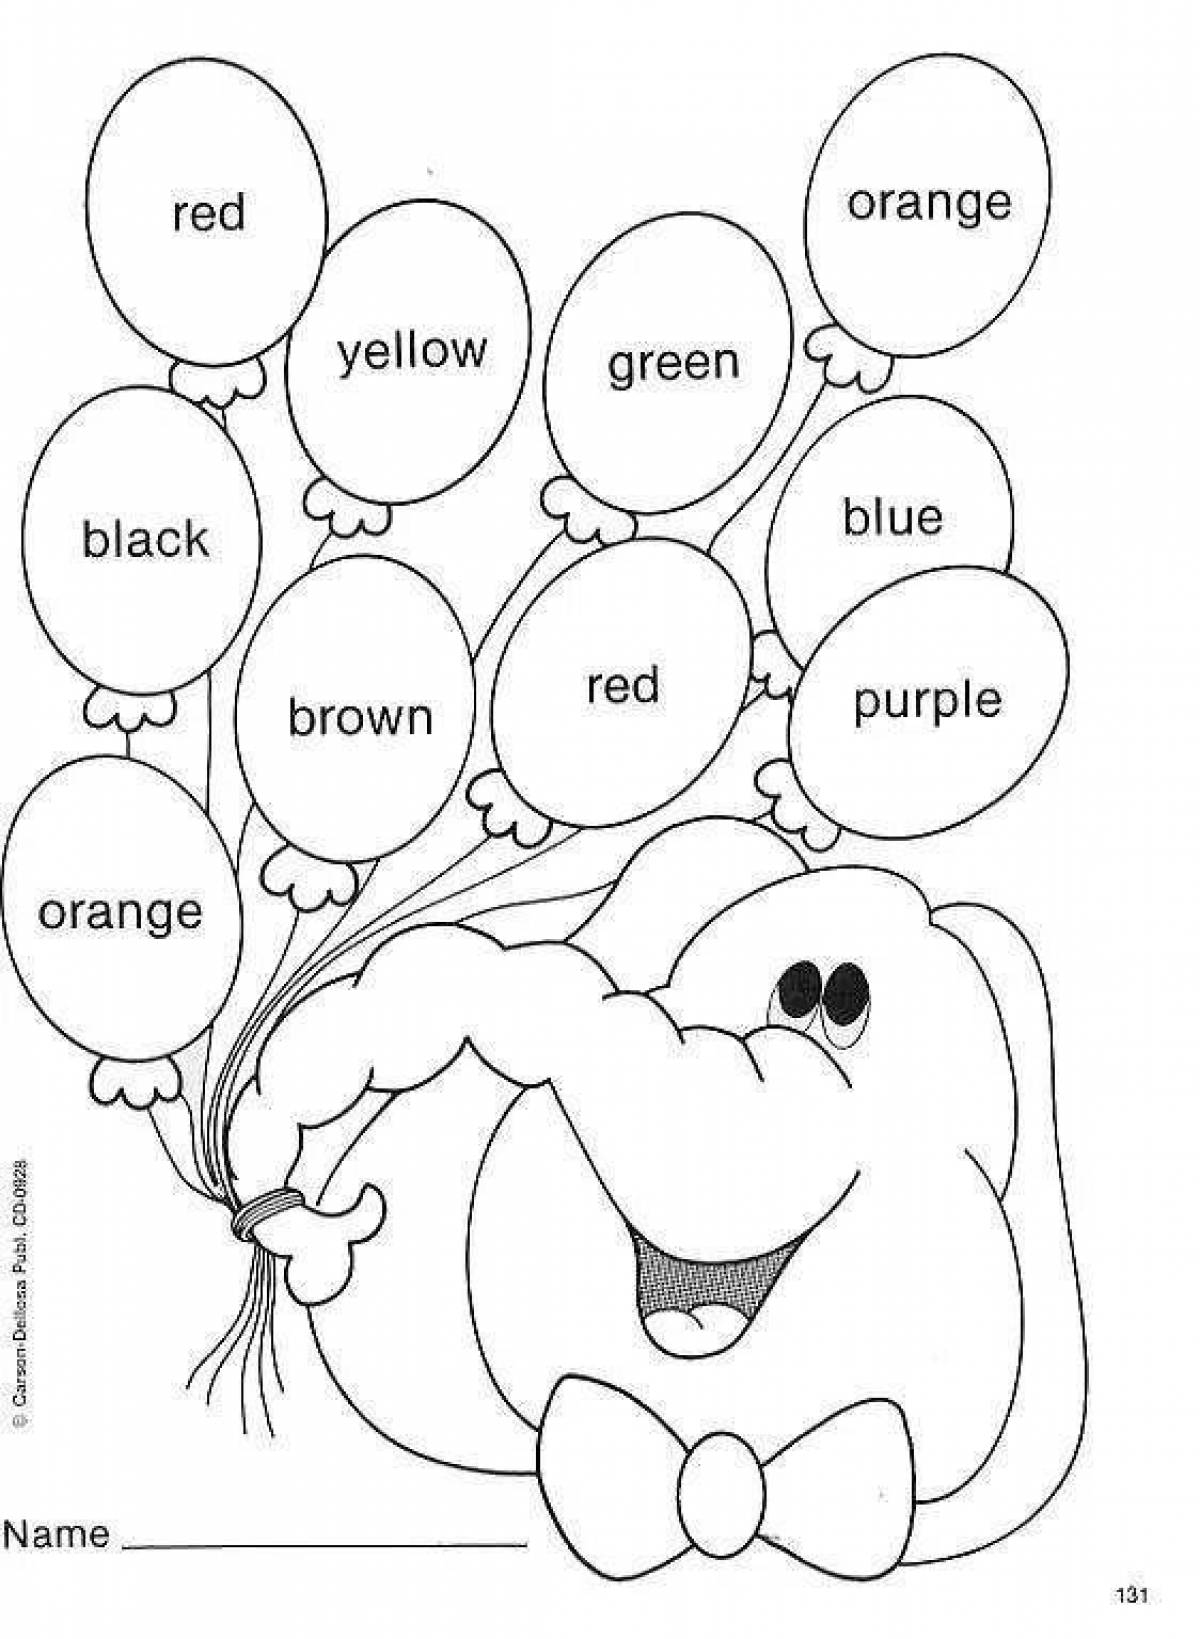 Colorful sketch coloring book in english